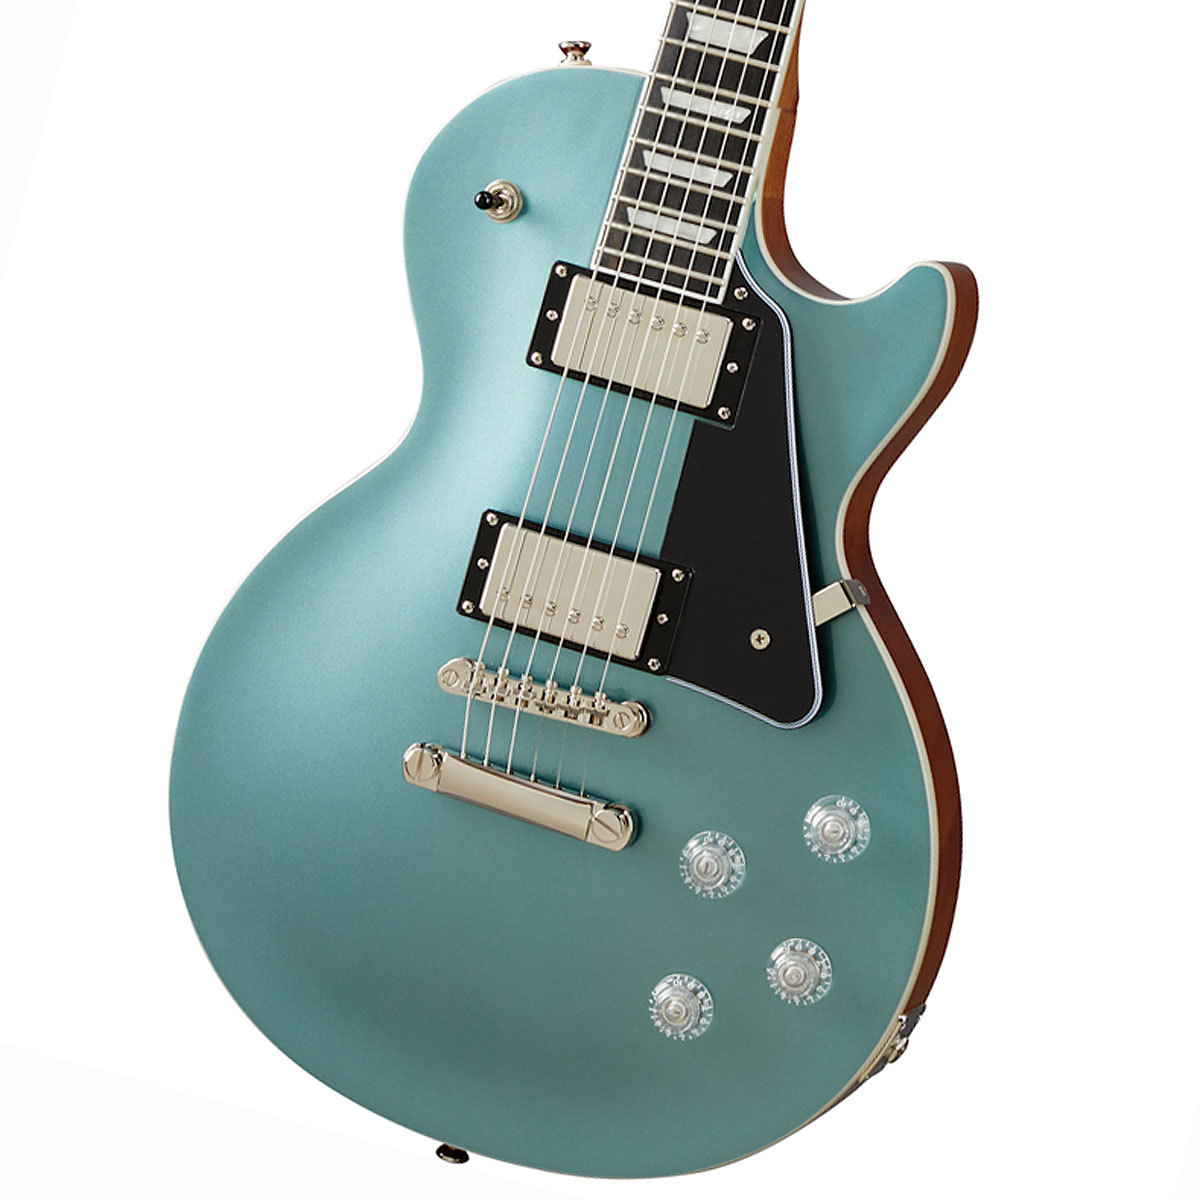 Epiphone / Inspired by Gibson Les Paul Modern Faded Pelham Blue (FPE)  エレキギター レスポール